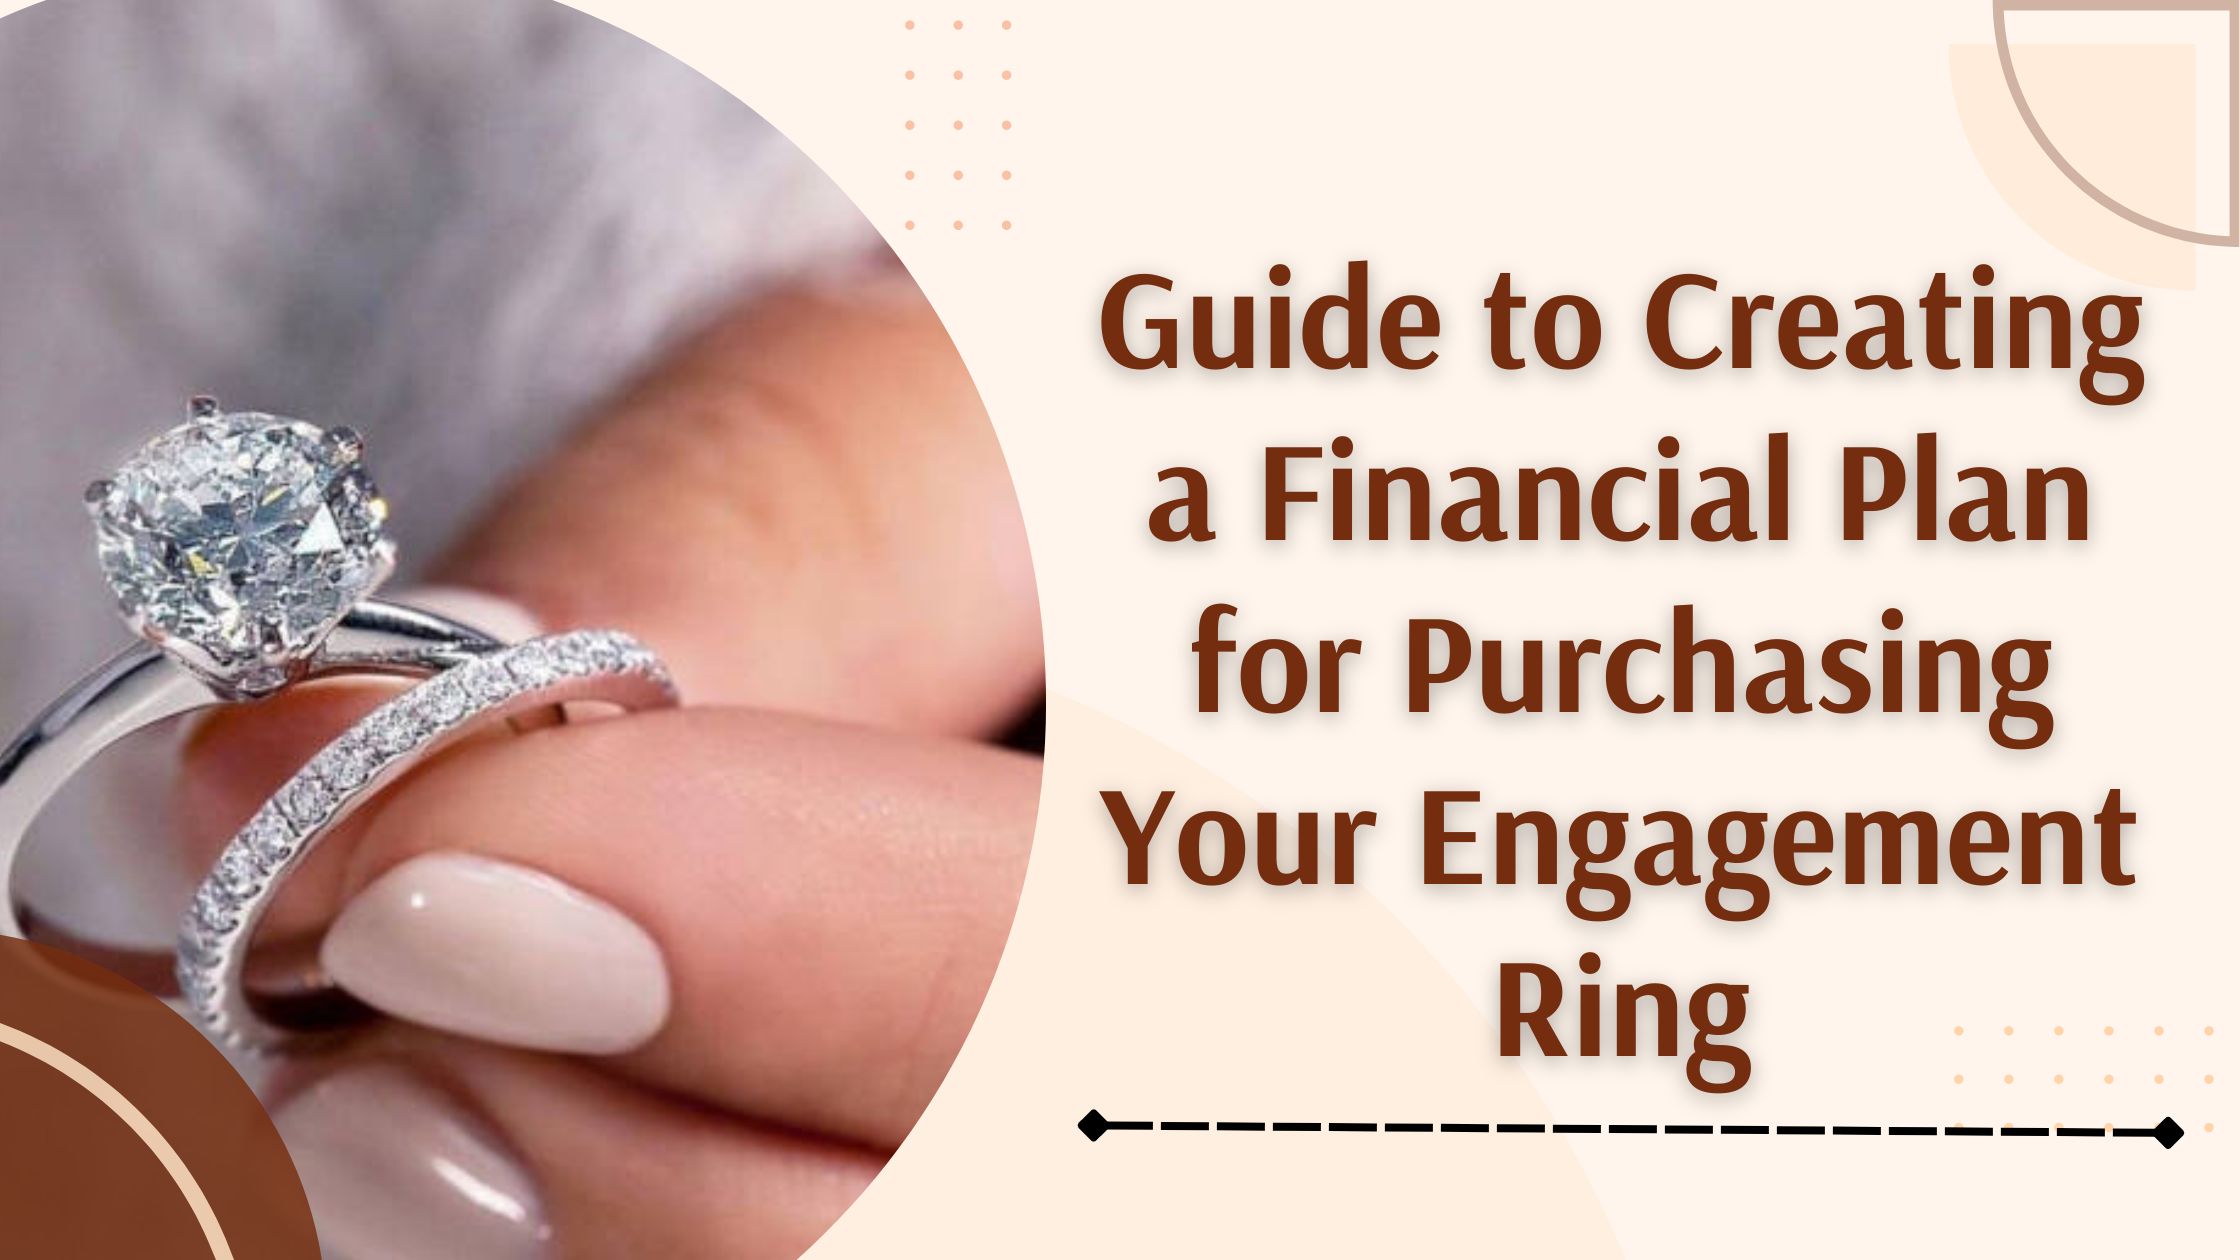 Guide to Creating a Financial Plan for Purchasing Your Engagement Ring